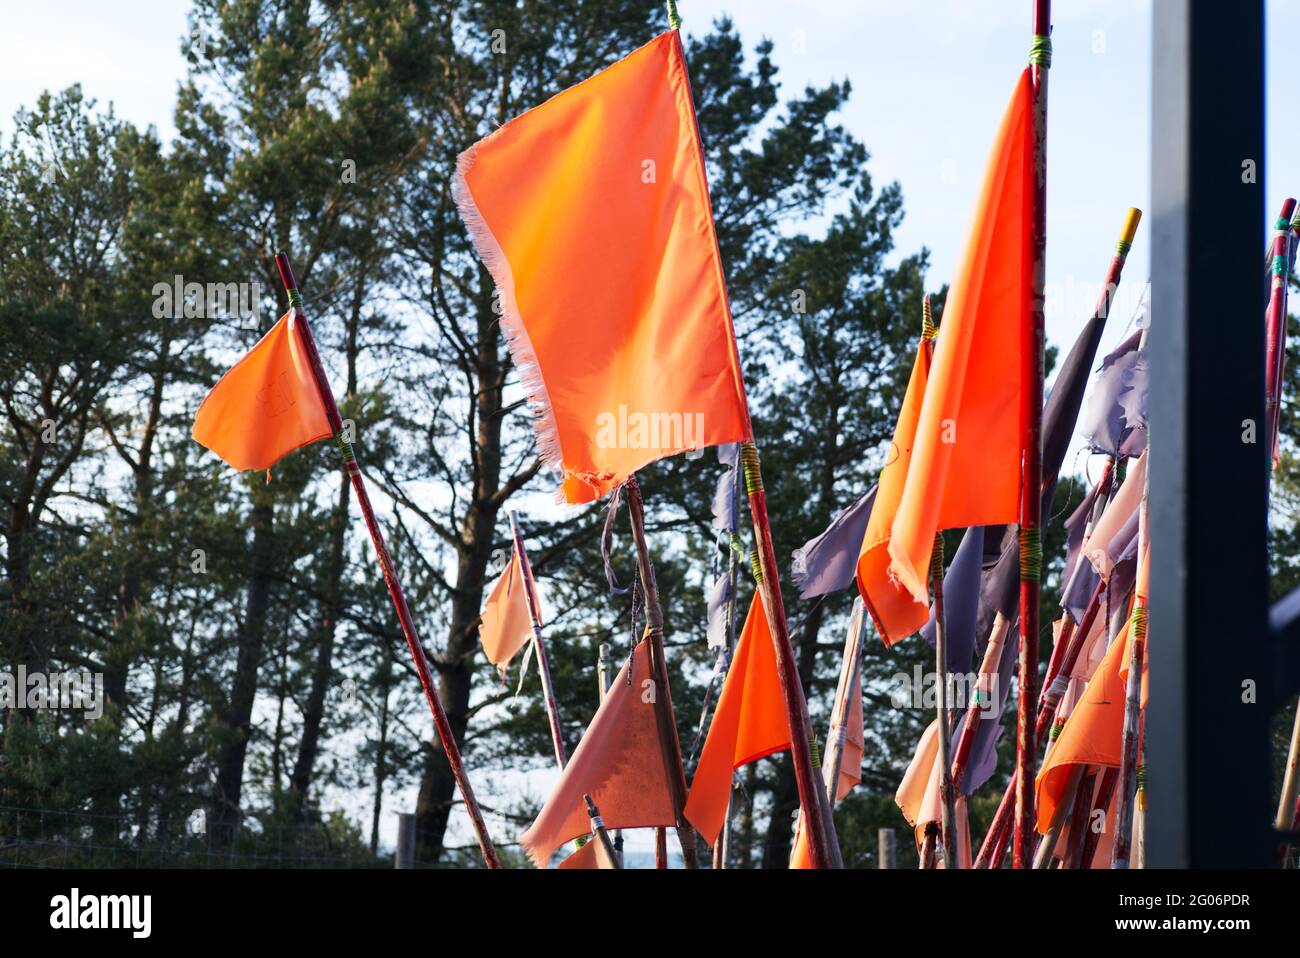 orange fishing flags against trees in a harbor, Stock Photo